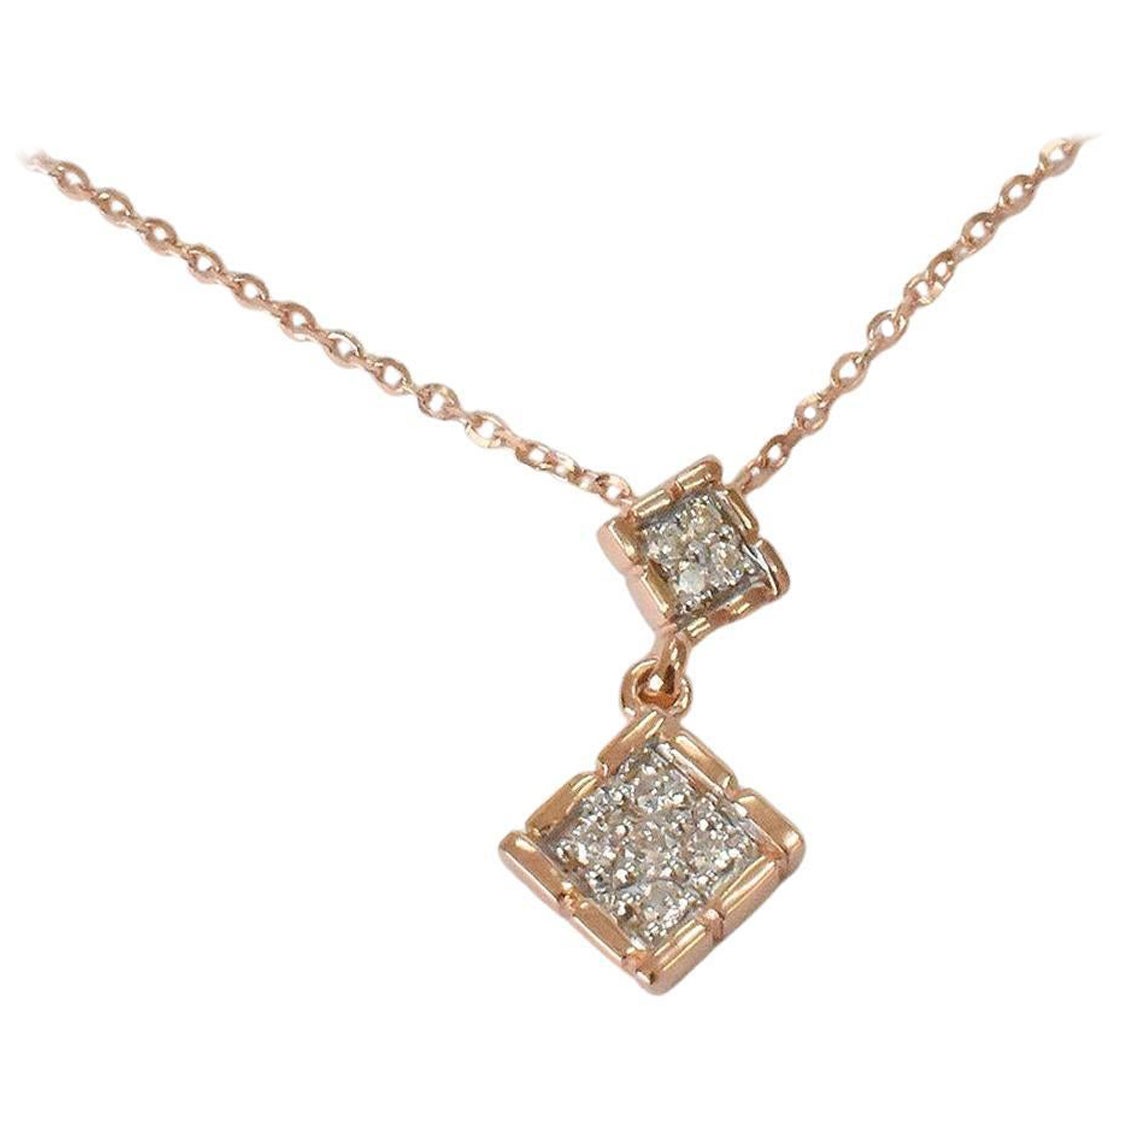 Square Charm Diamond Necklace is made of 18k solid gold available in three colors of gold, Rose Gold / White Gold / Yellow Gold.

Lightweight and gorgeous, these are a great gift for anyone on your list. Perfect for everyday wear or for those who